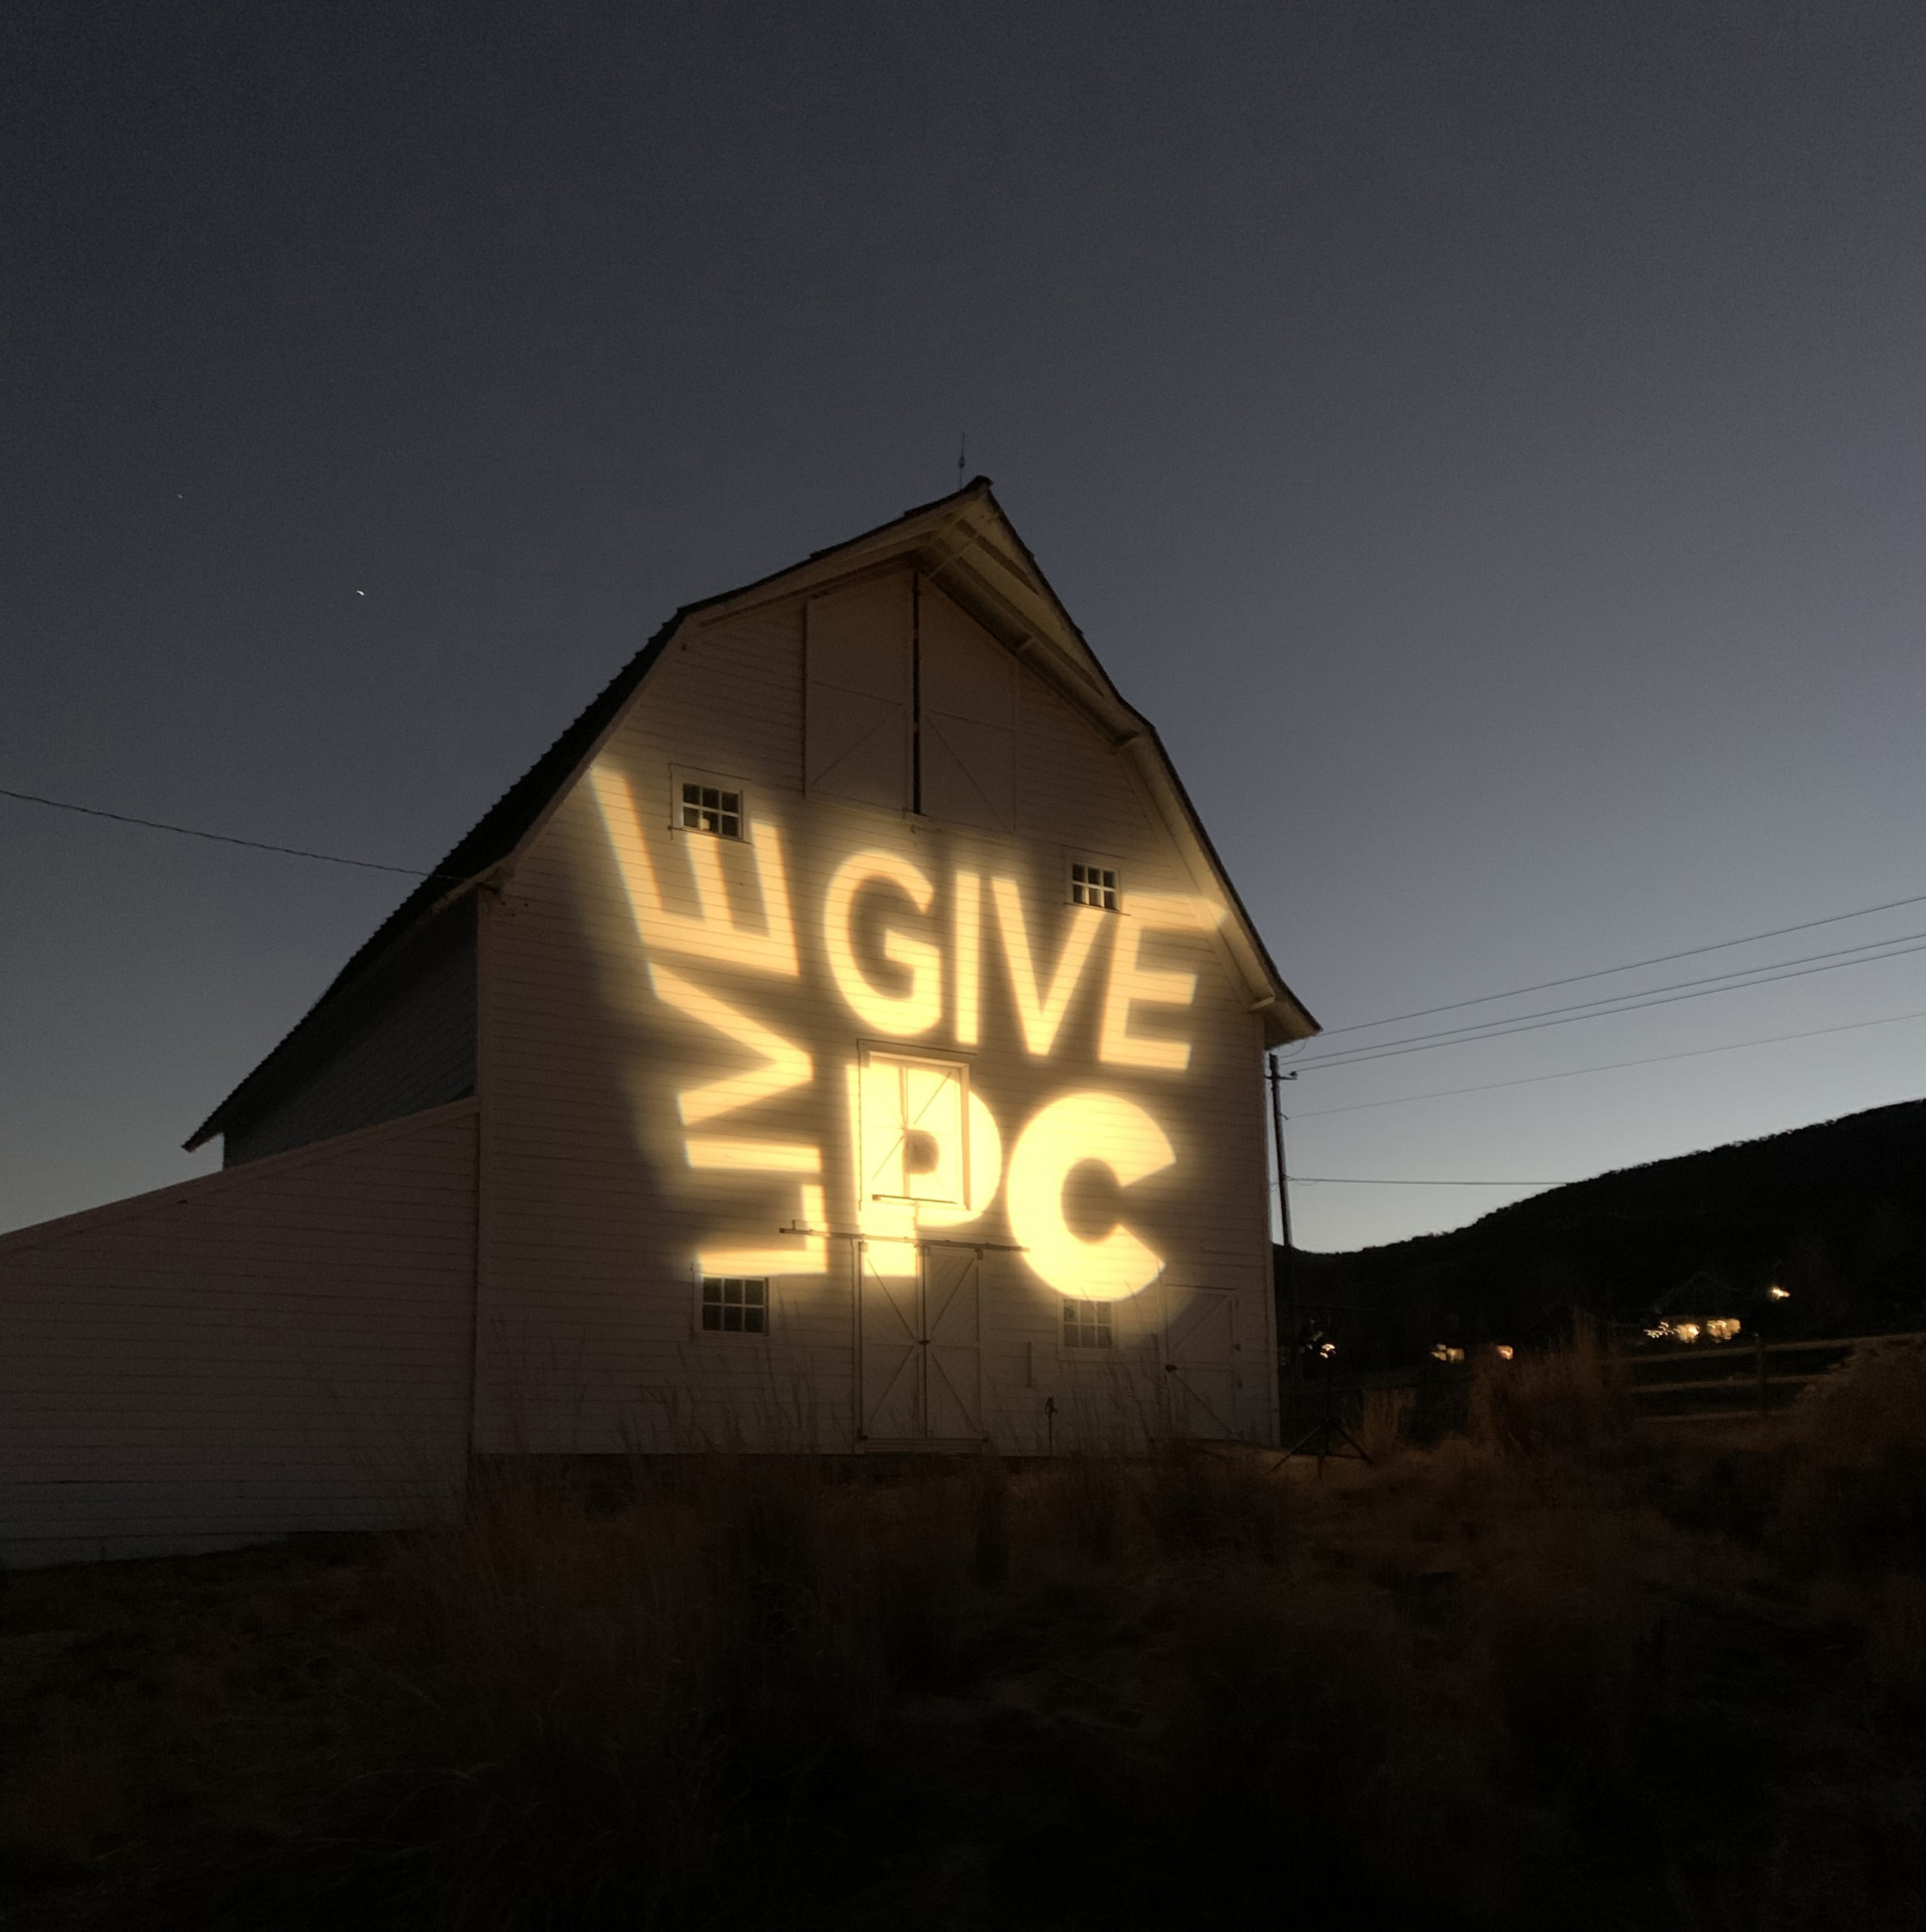 Share the Love Live PC Give PC is this Friday! CMFH